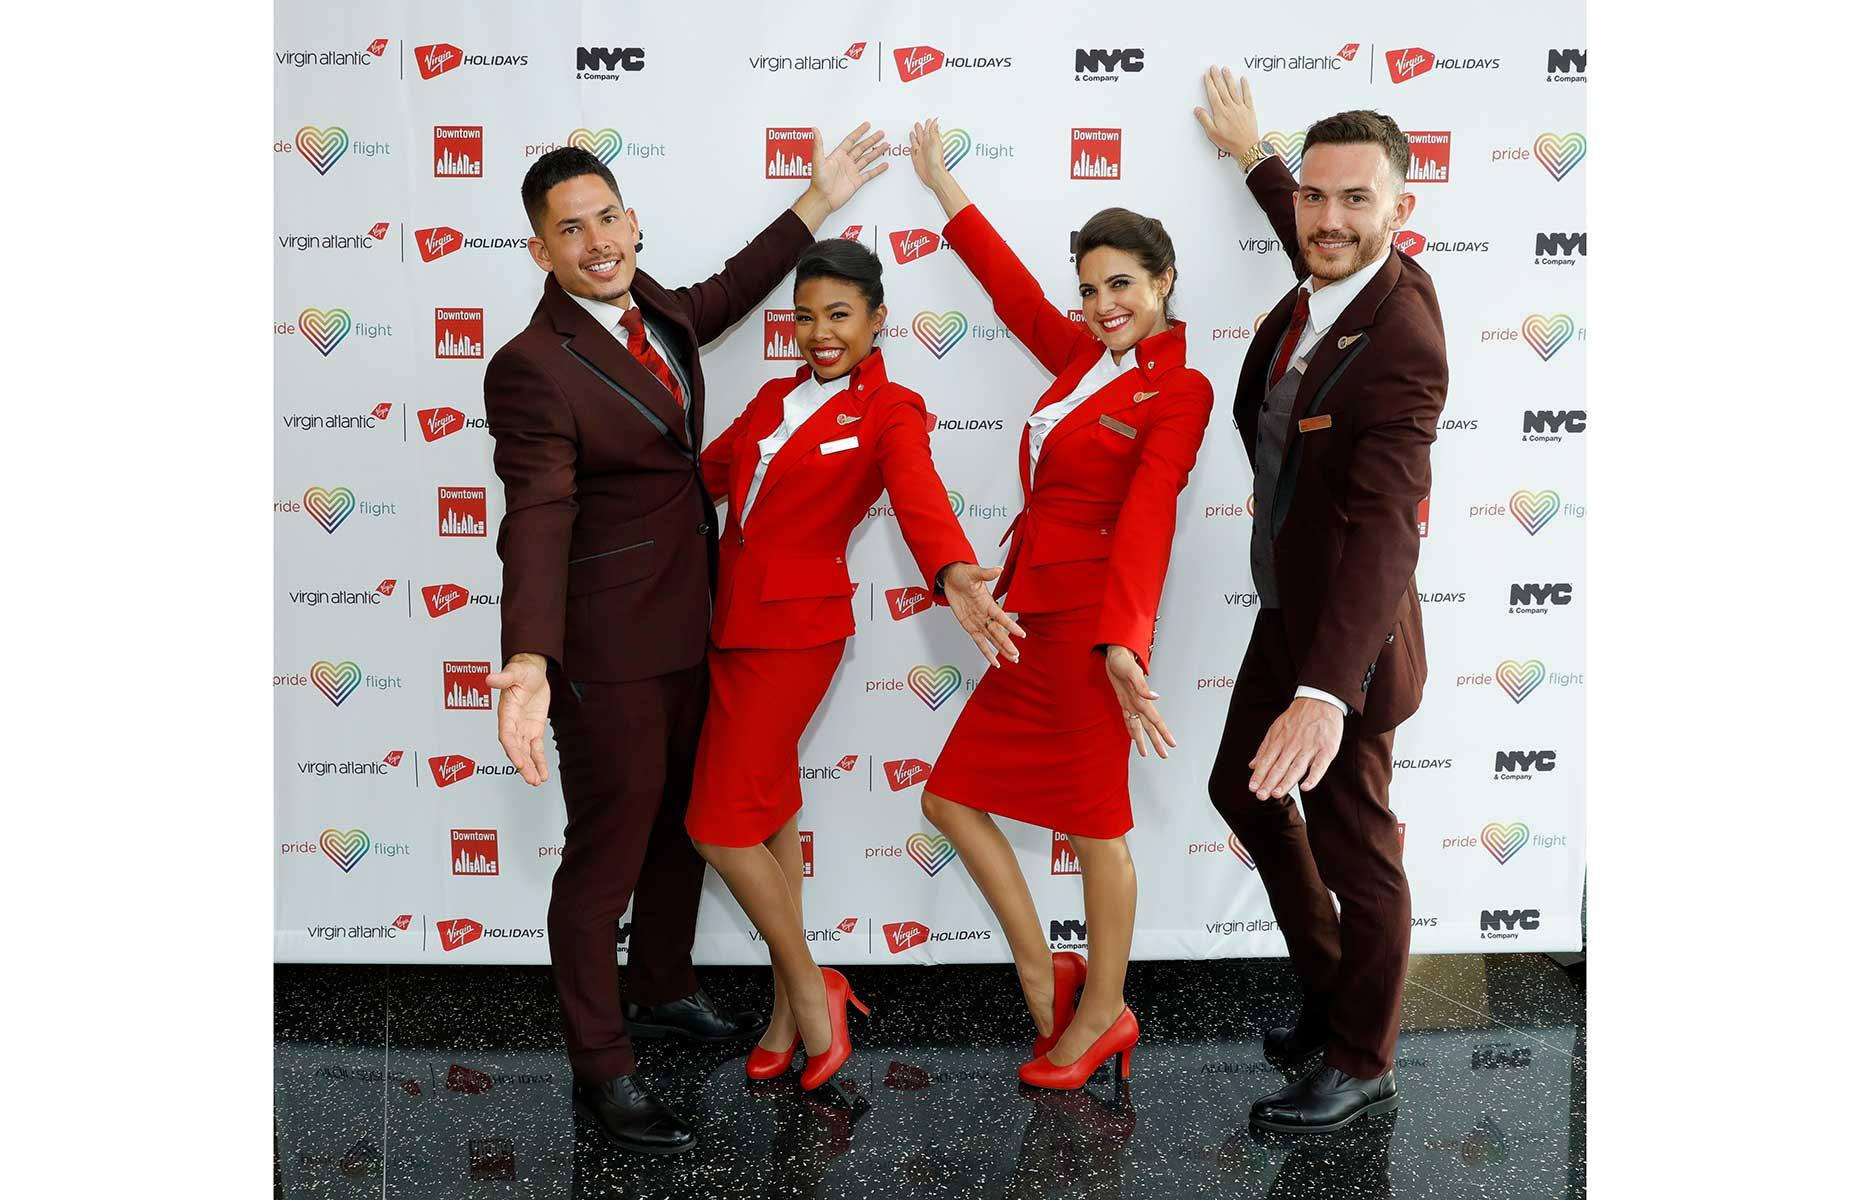 <p>Cabin crew requirements have changed over the decades; as we've seen already, the 1930s followed strict rules regarding age, height and weight, and since then tailored uniforms and specific hairstyles became the norm. But the 2020s have welcomed a more relaxed approach and in September 2022 Virgin Atlantic <a href="https://www.theguardian.com/business/2022/sep/28/virgin-atlantic-staff-can-choose-which-uniform-to-wear-no-matter-their-gender">ditched gender-specific uniforms</a> allowing crew, pilots and ground staff to choose whichever they feel most comfortable in. Earlier in the year staff were also permitted to keep their tattoos visible, marking the first UK airline to do so.</p>